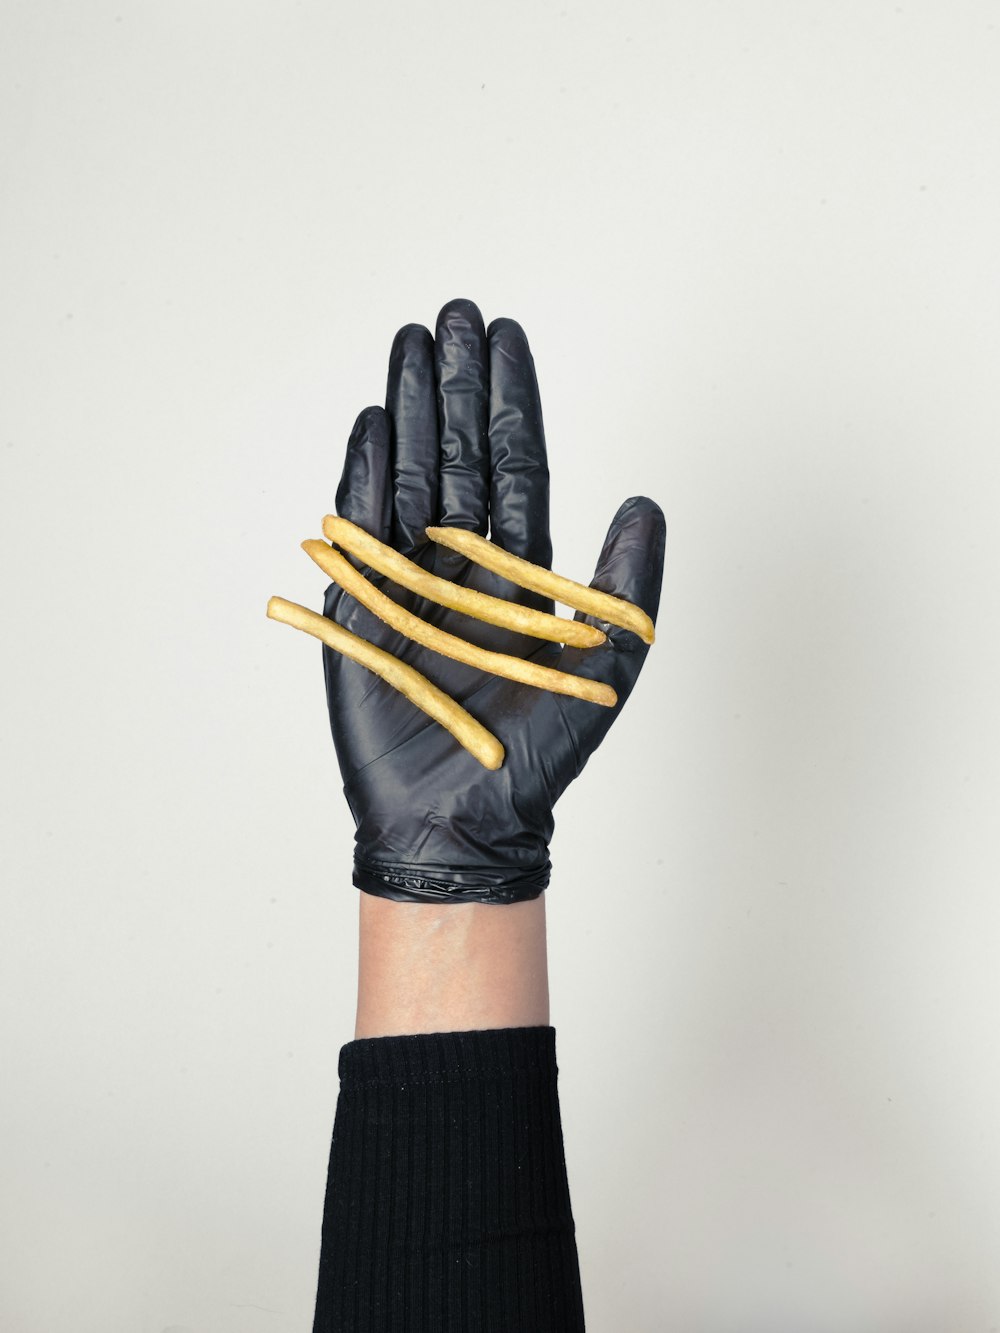 black leather gloves on white surface